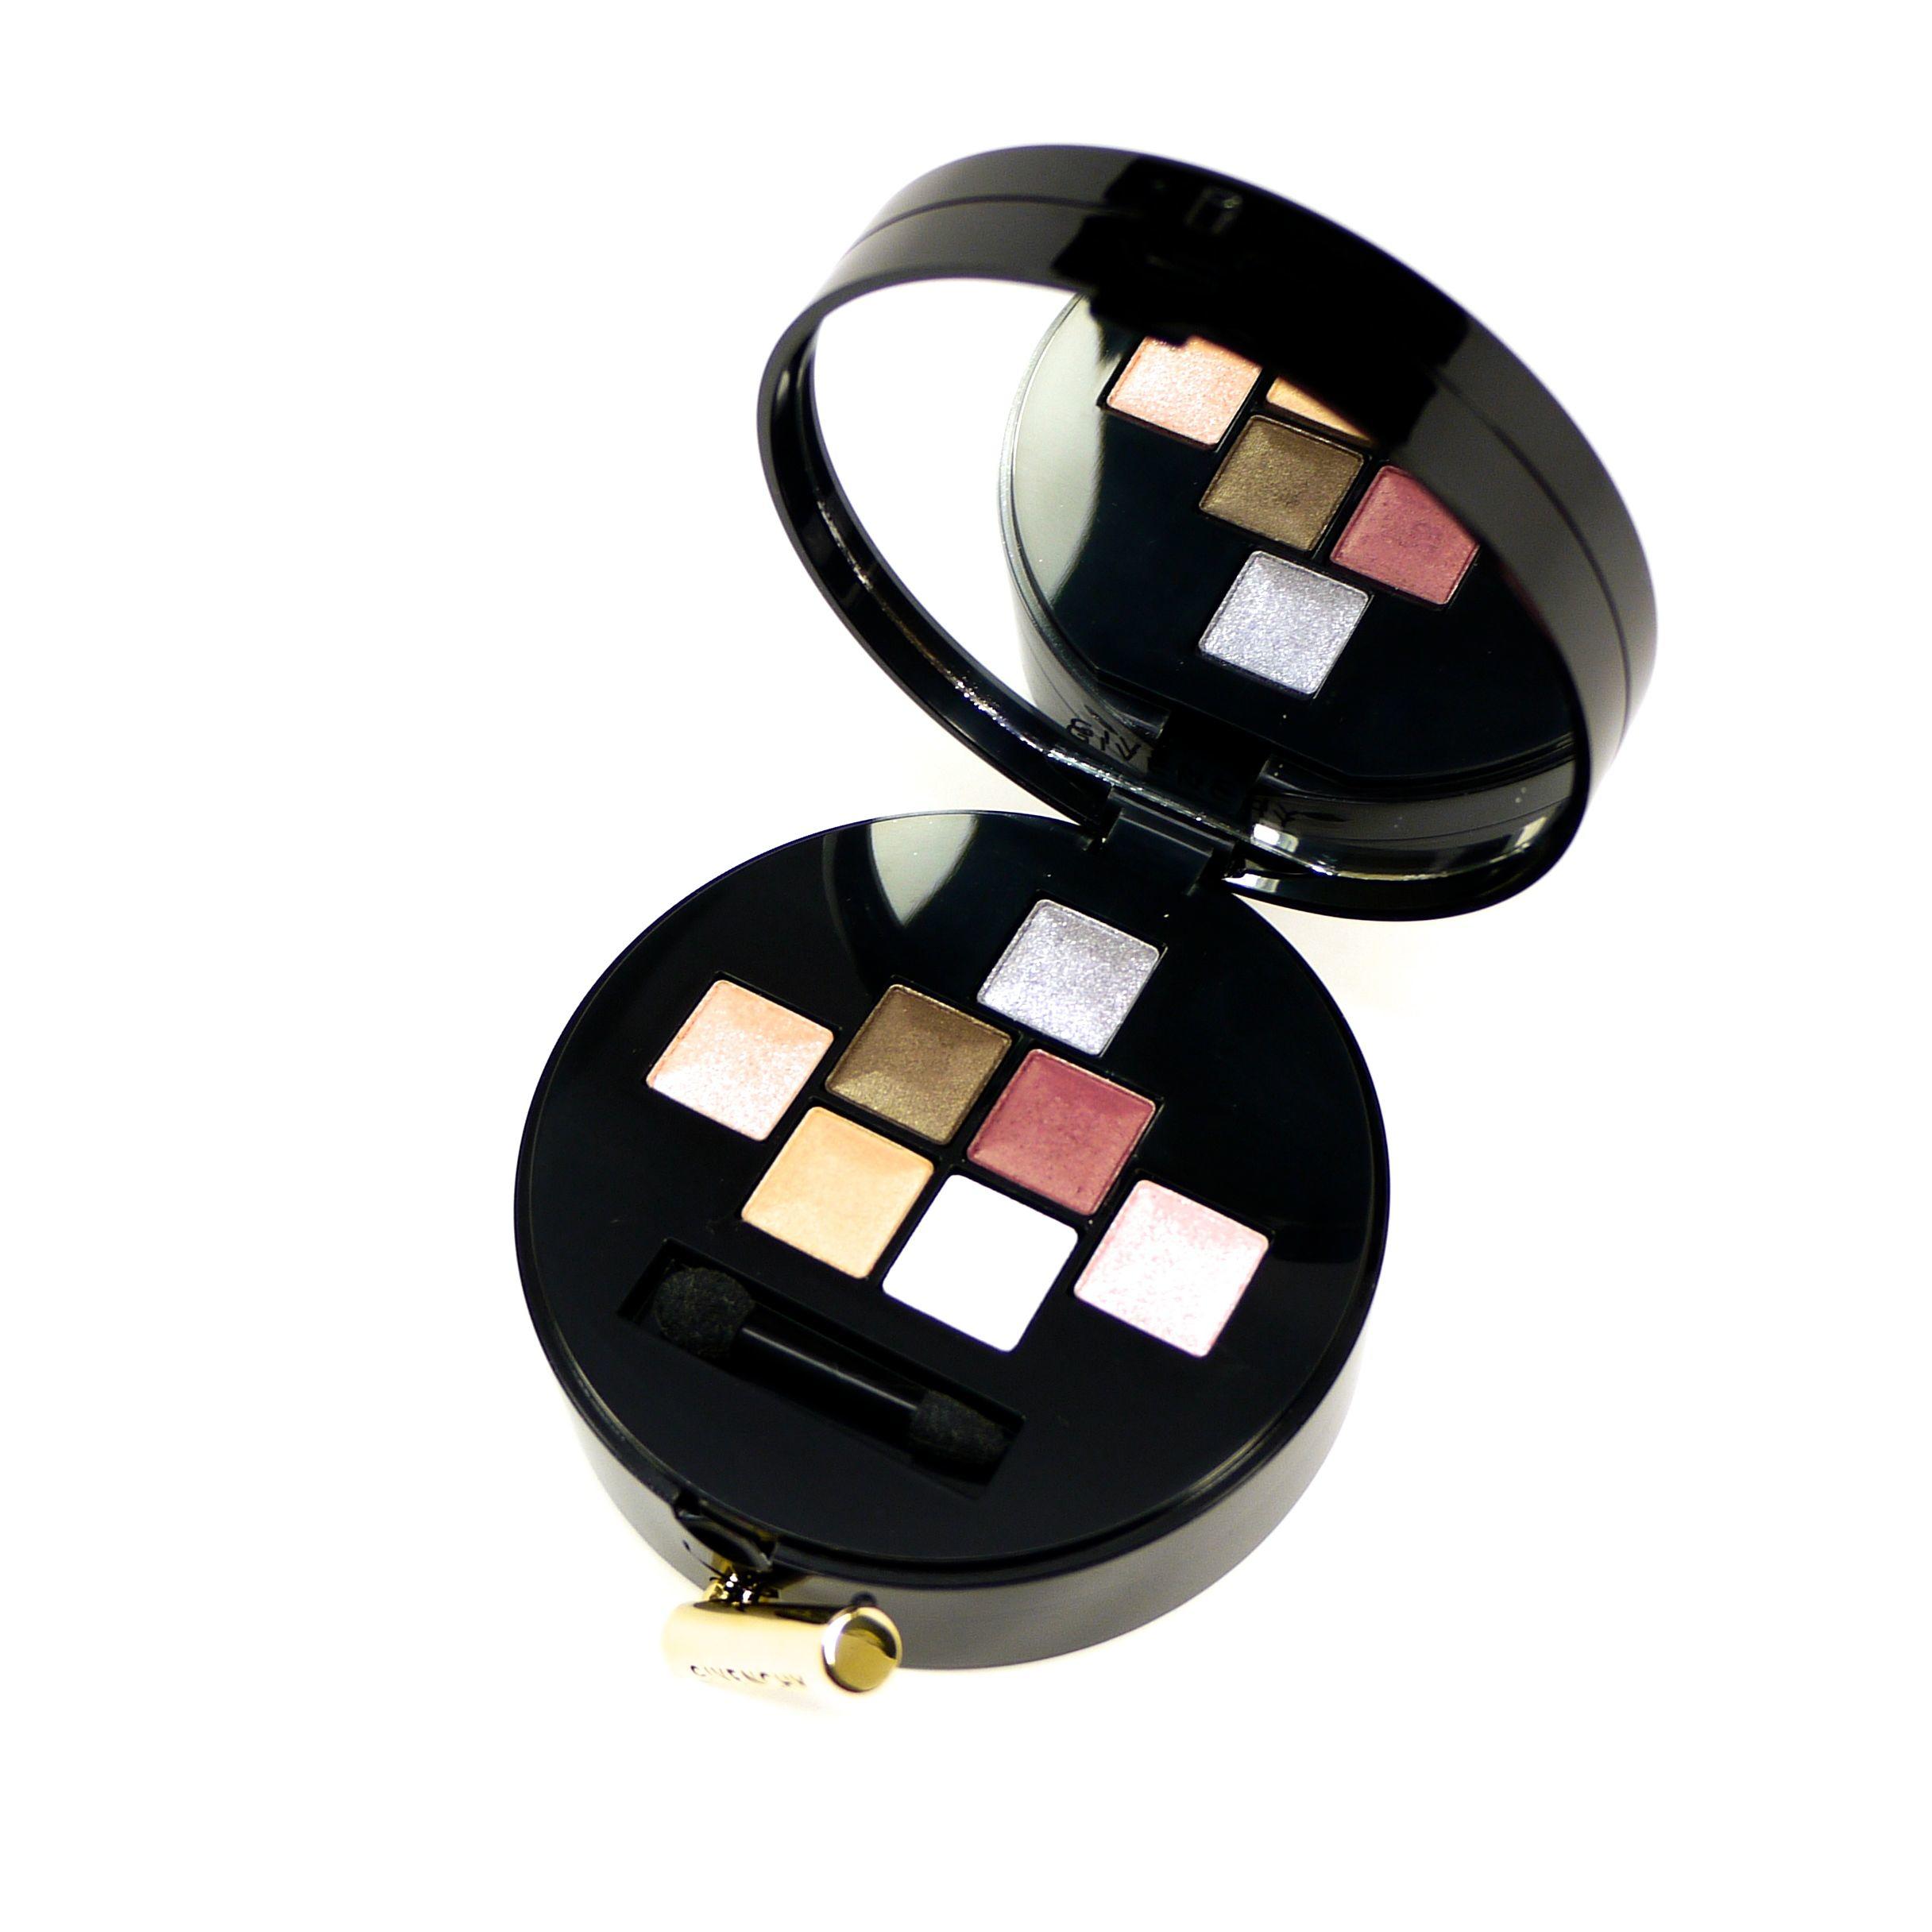 givenchy glamour on the gold travel makeup palette